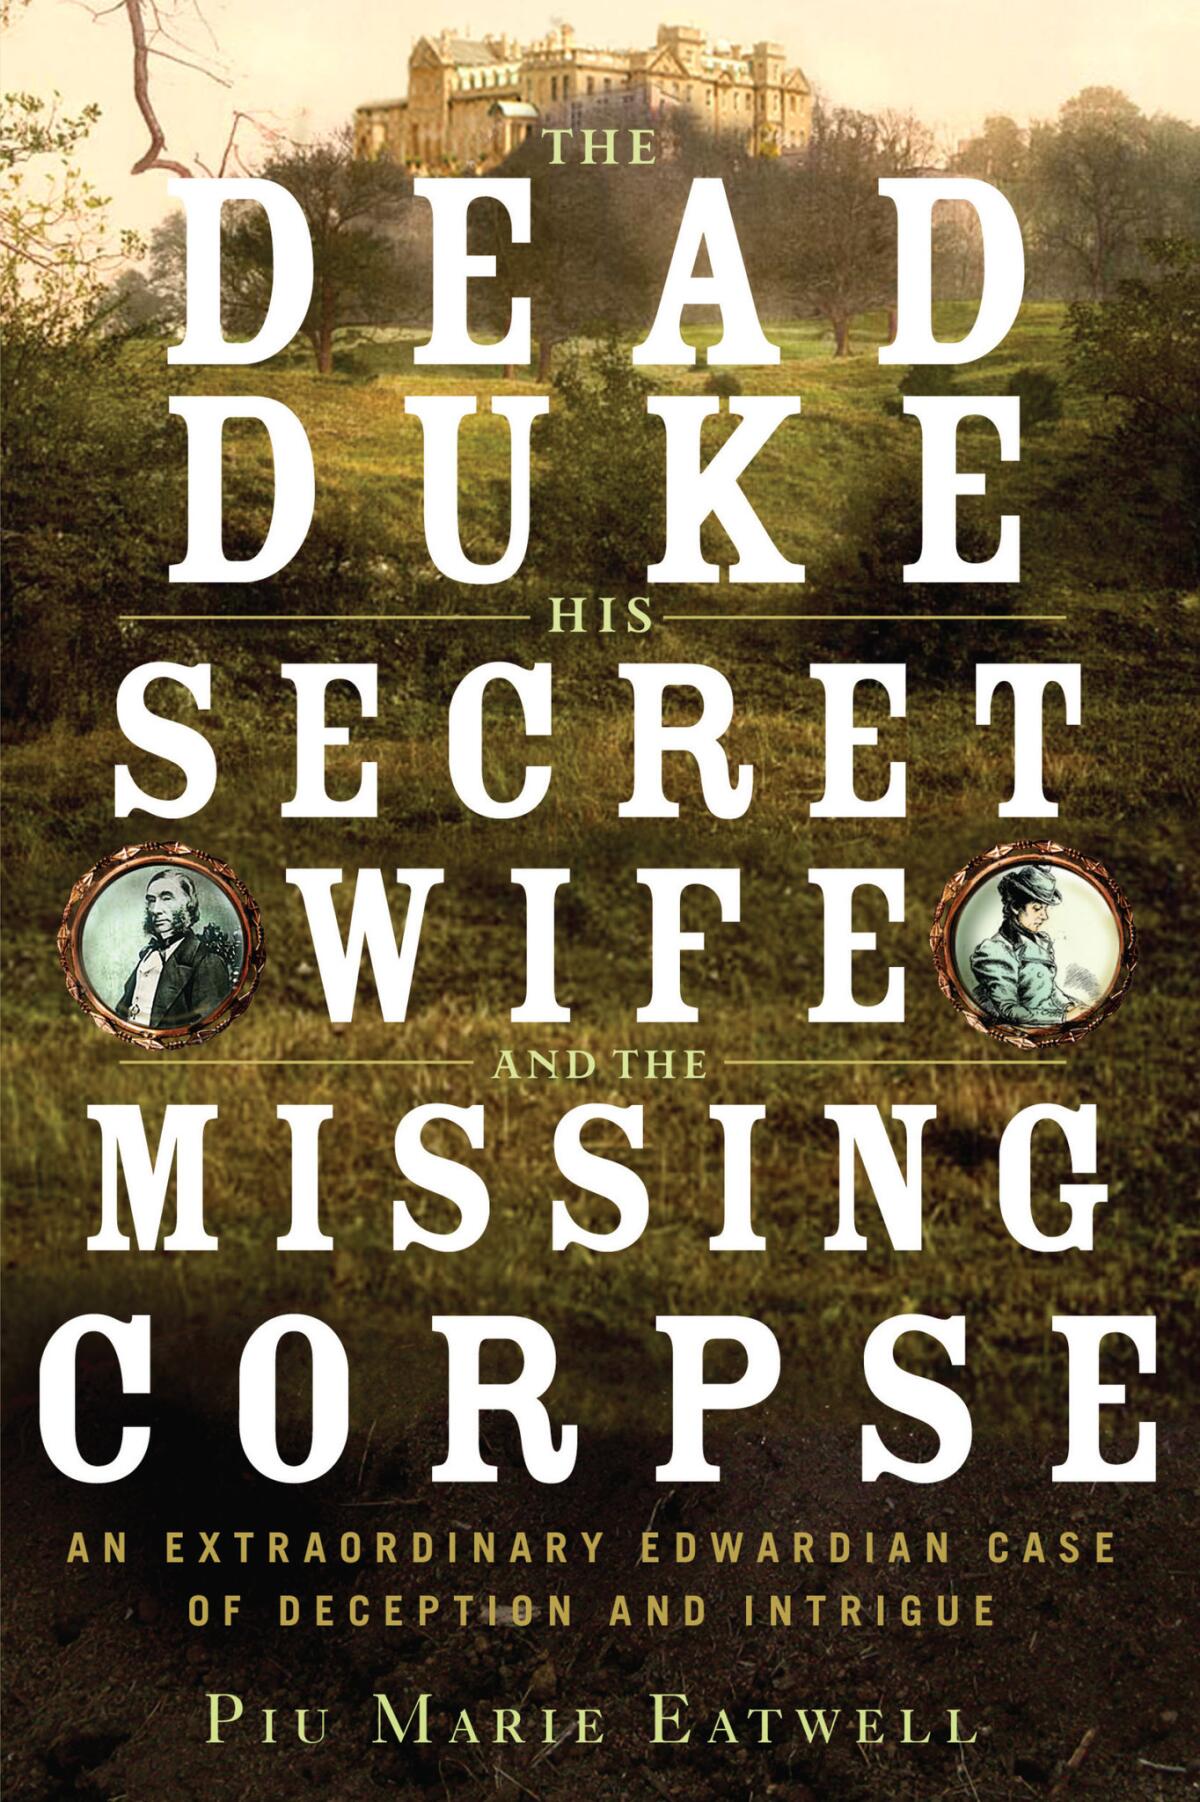 "The Dead Duke, His Secret Wife, and the Missing Corpse" by Piu Marie Eatwell